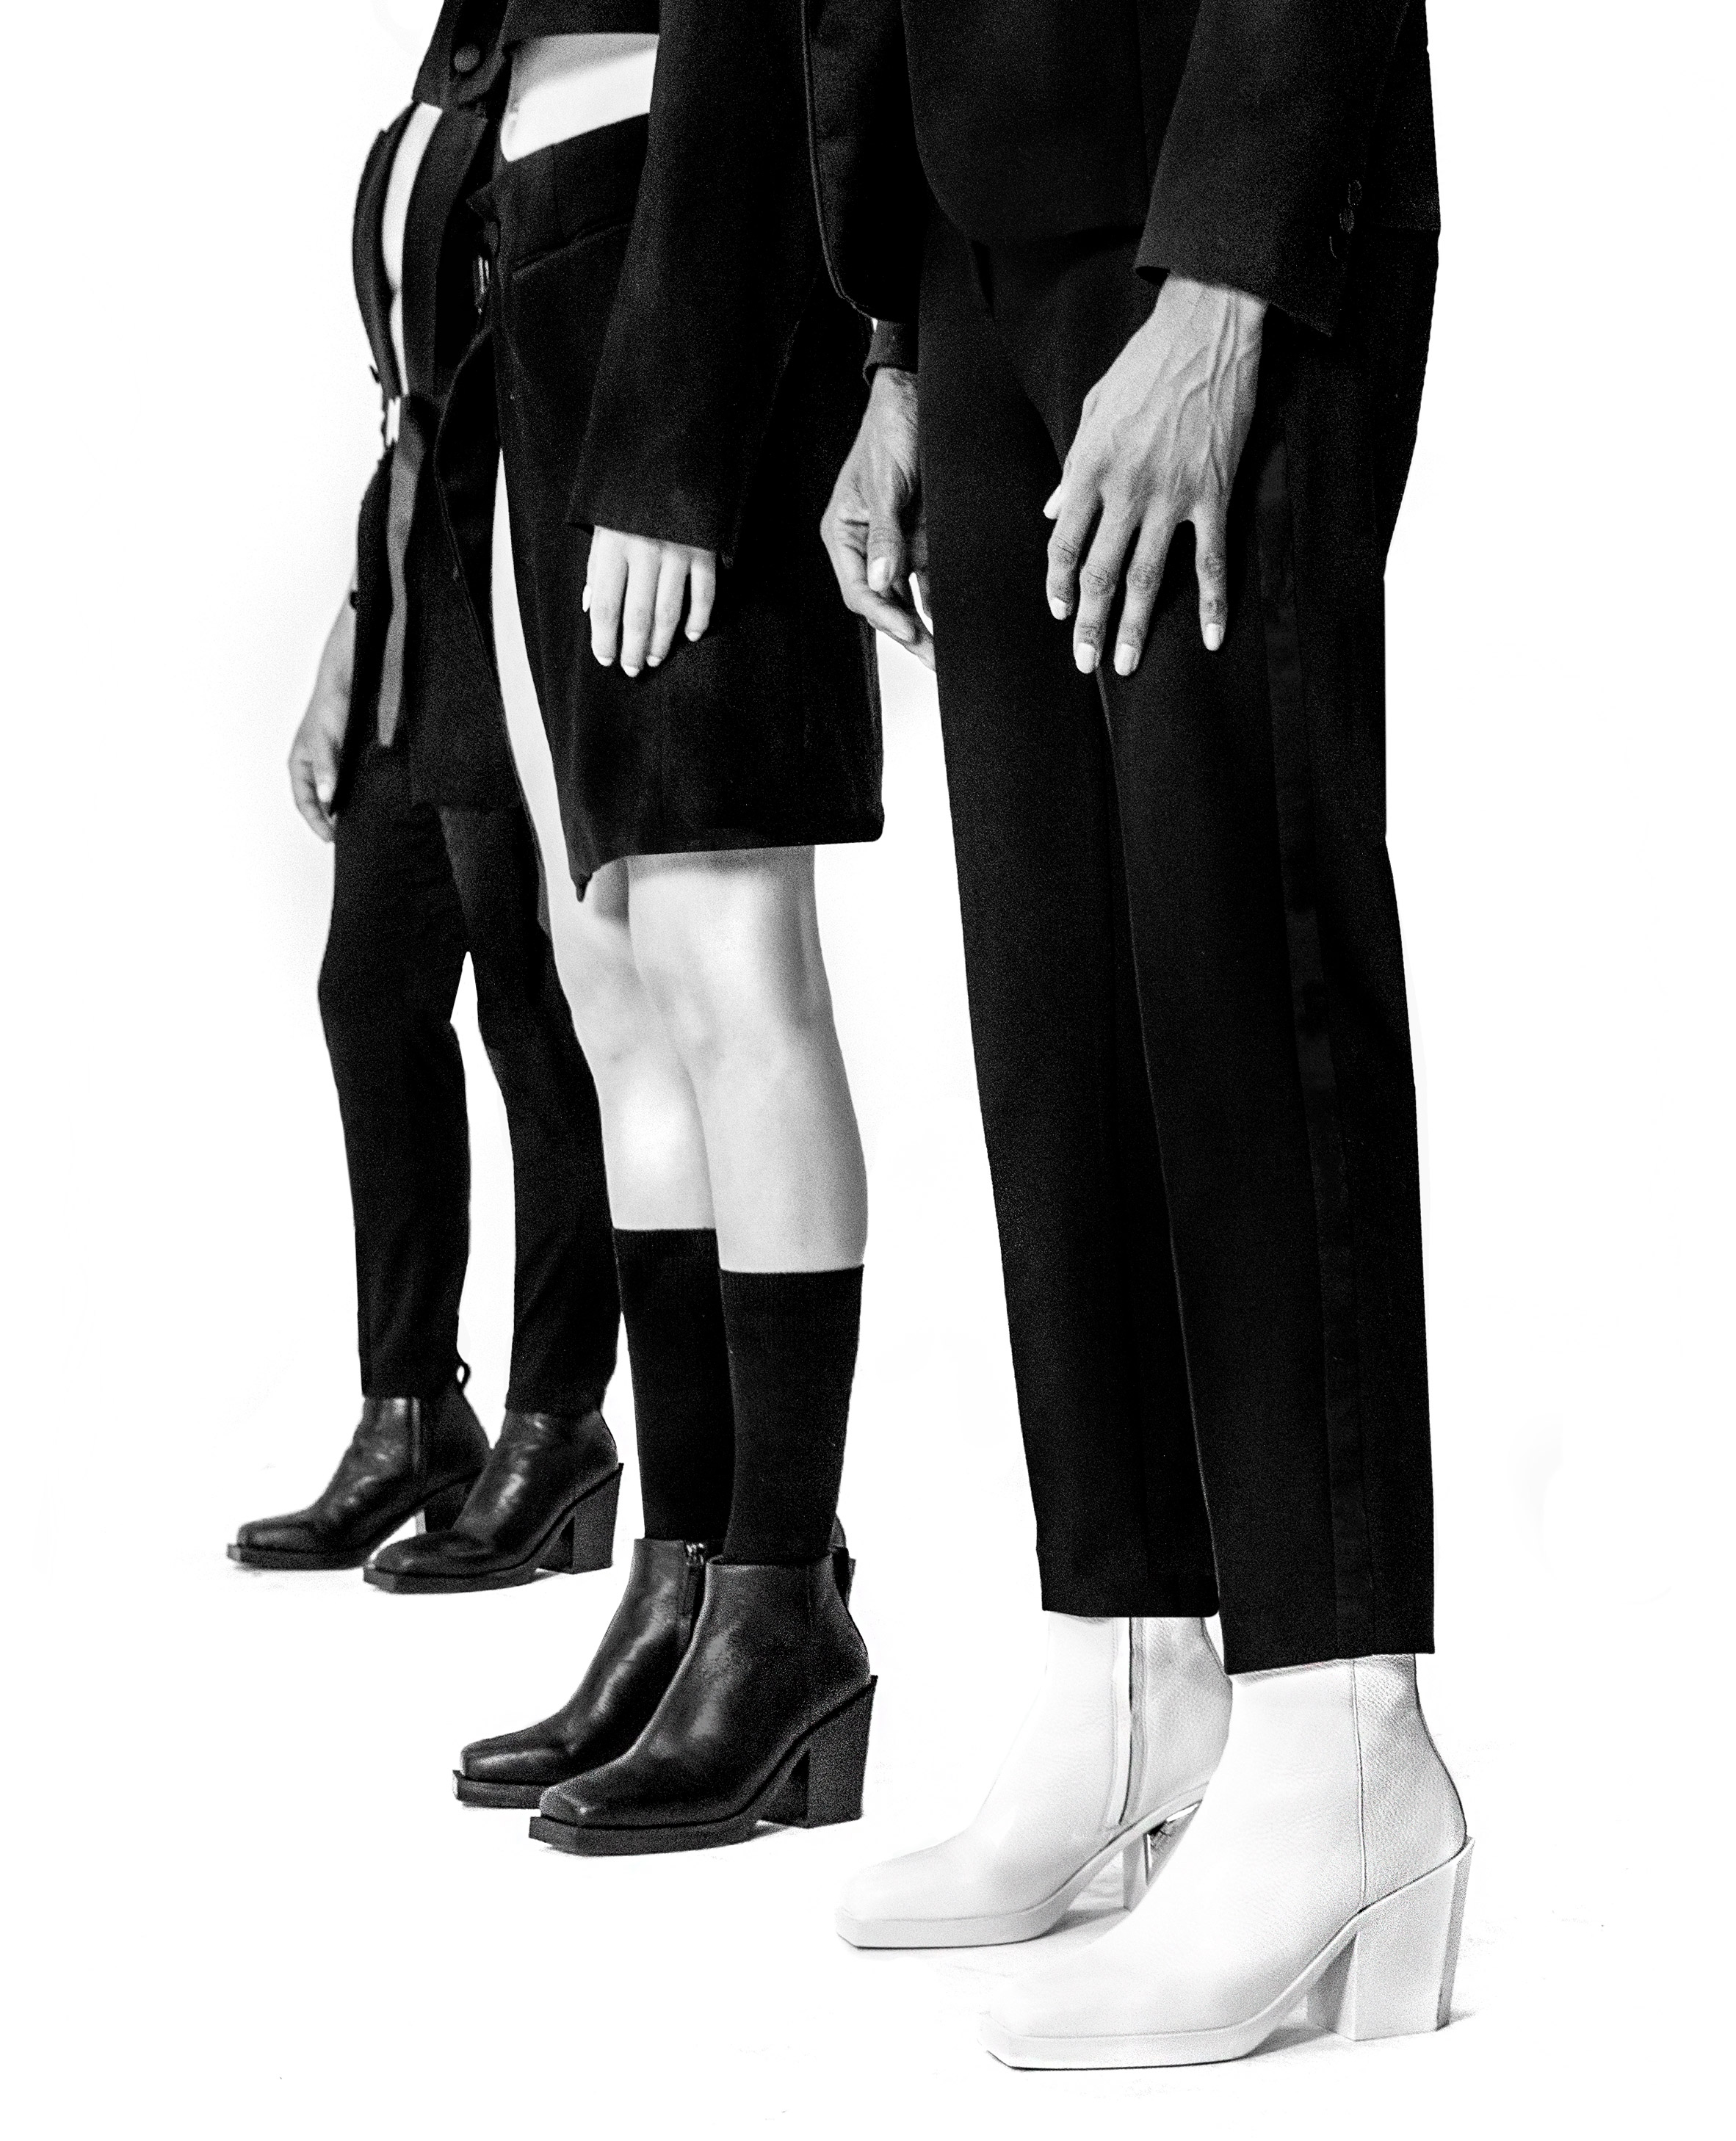 Shaun Ross X United Nude Boots